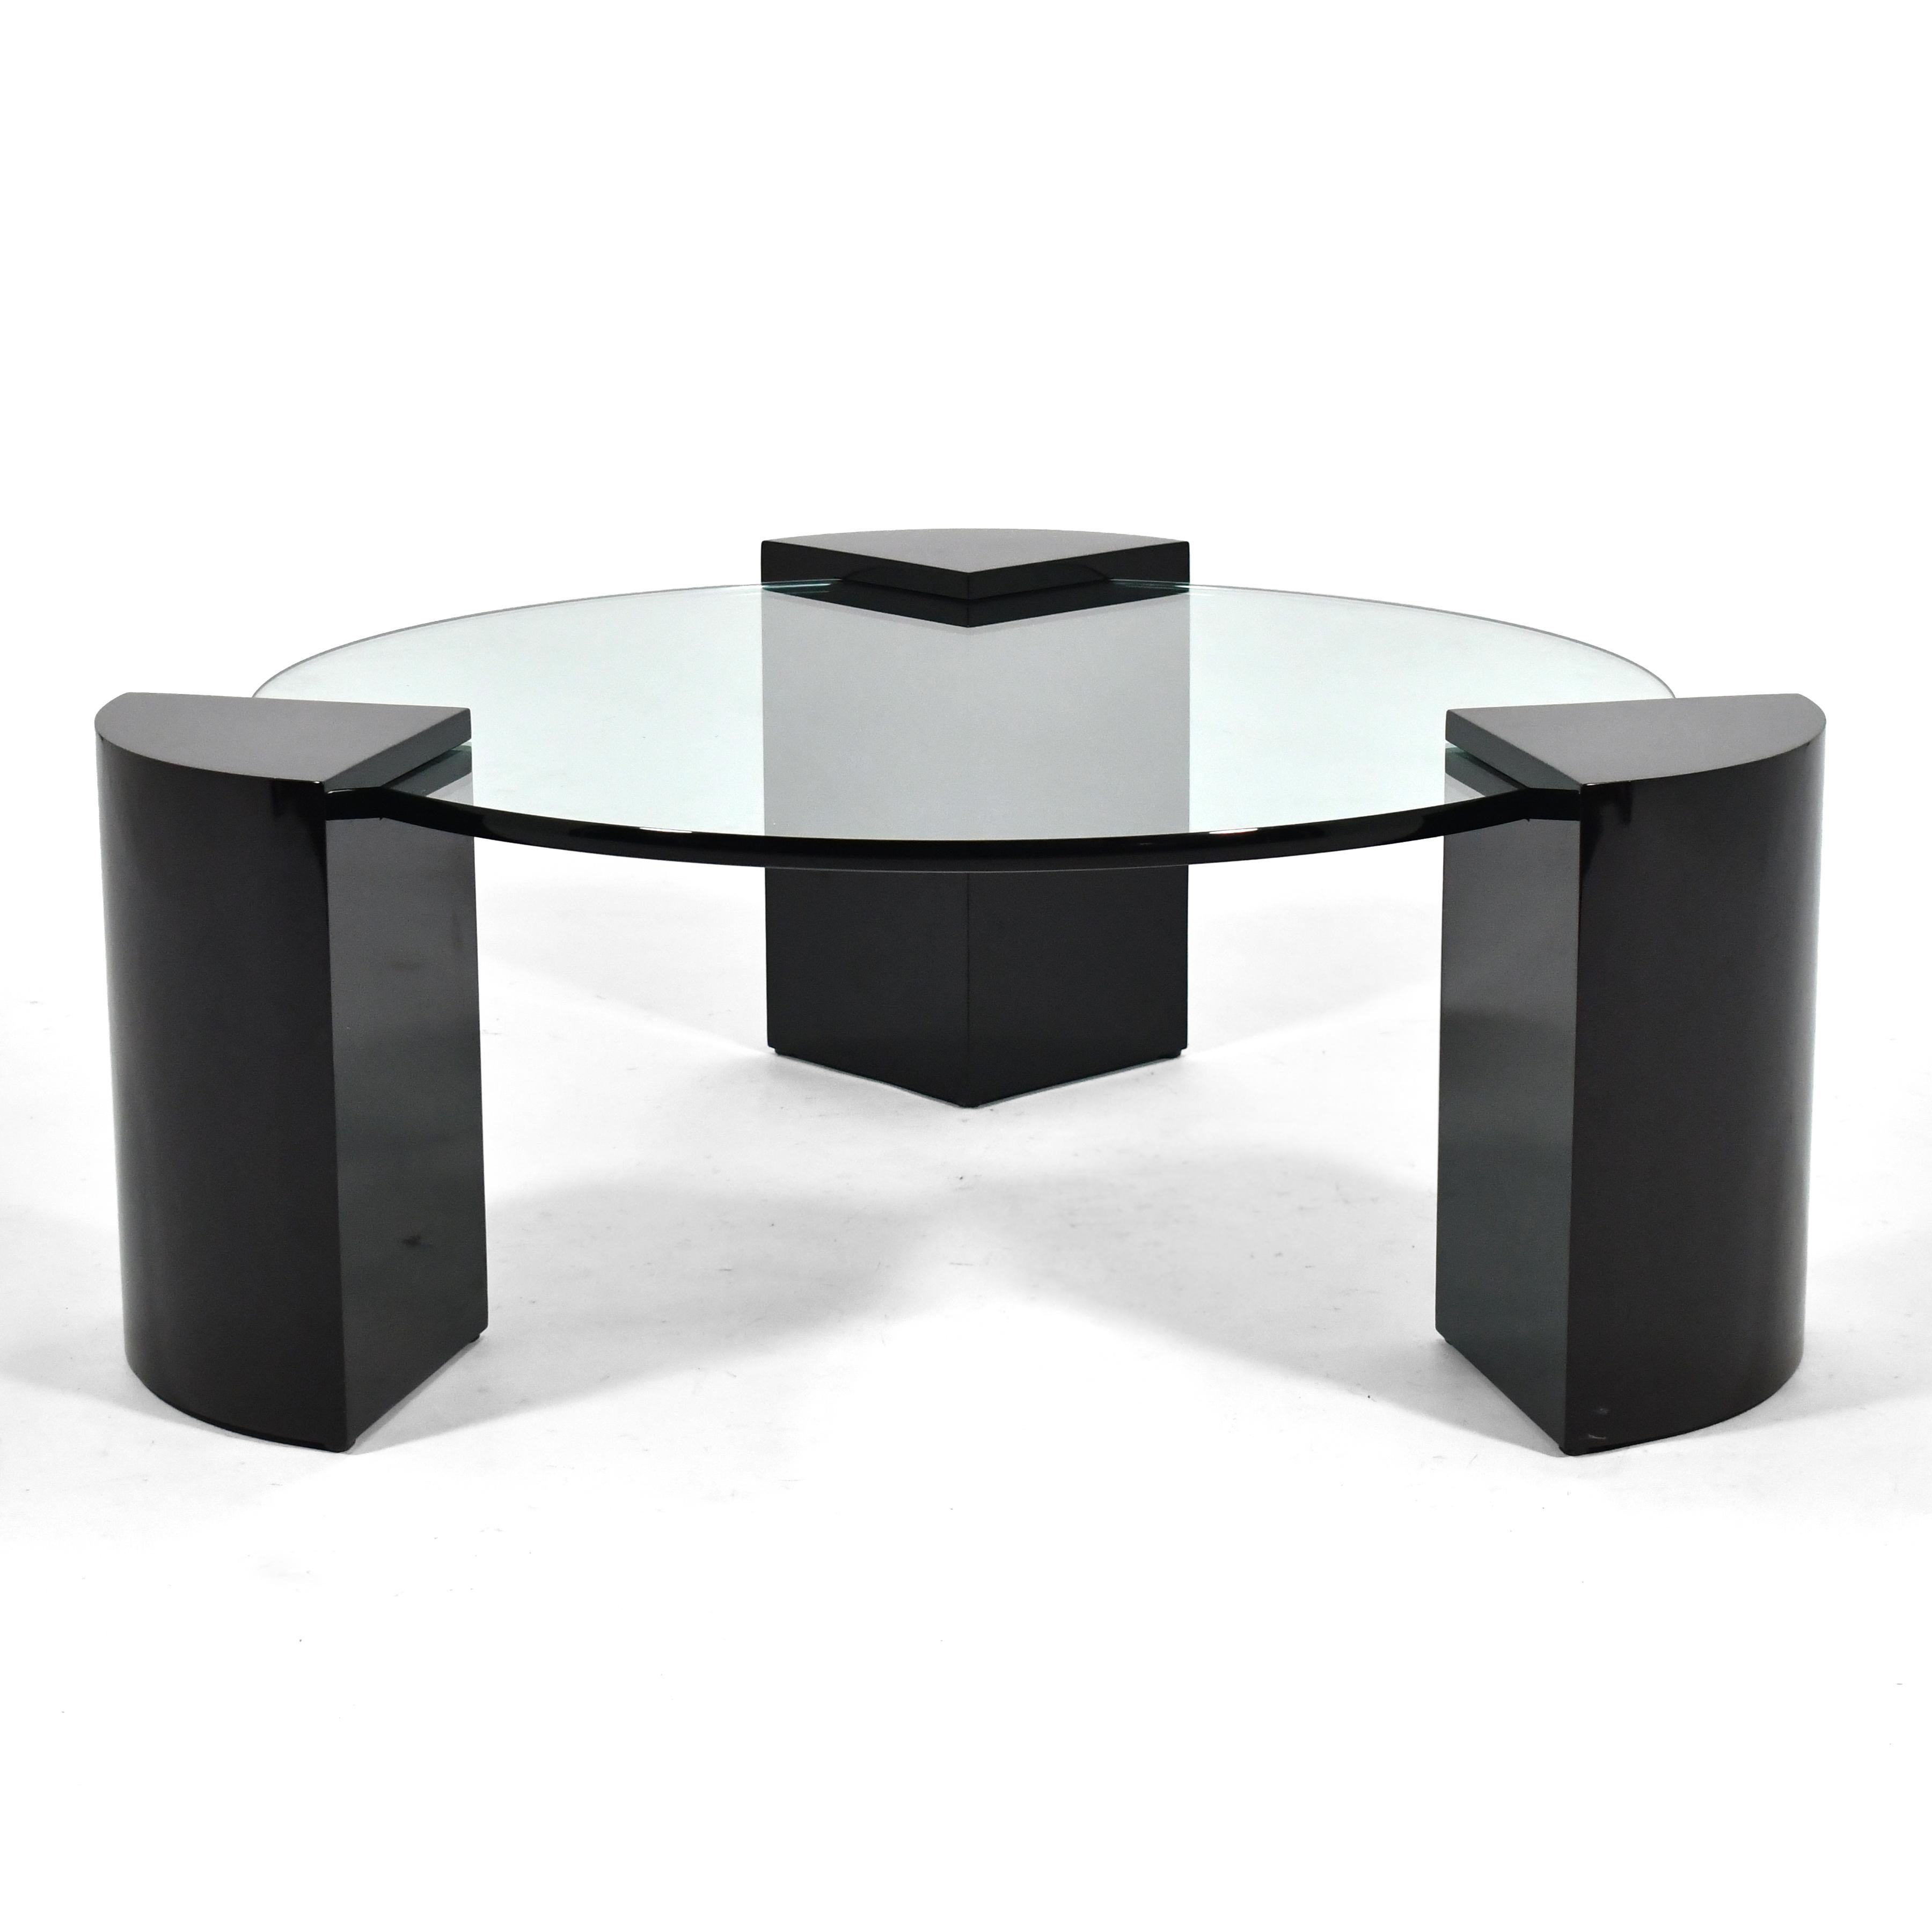 Created for Chicago interior designer Roy Klipp, this stylish coffee table has a terrific modernist design with three pie-shaped legs supporting a round glass top with a bull-nose edge.

Measures: 15.75